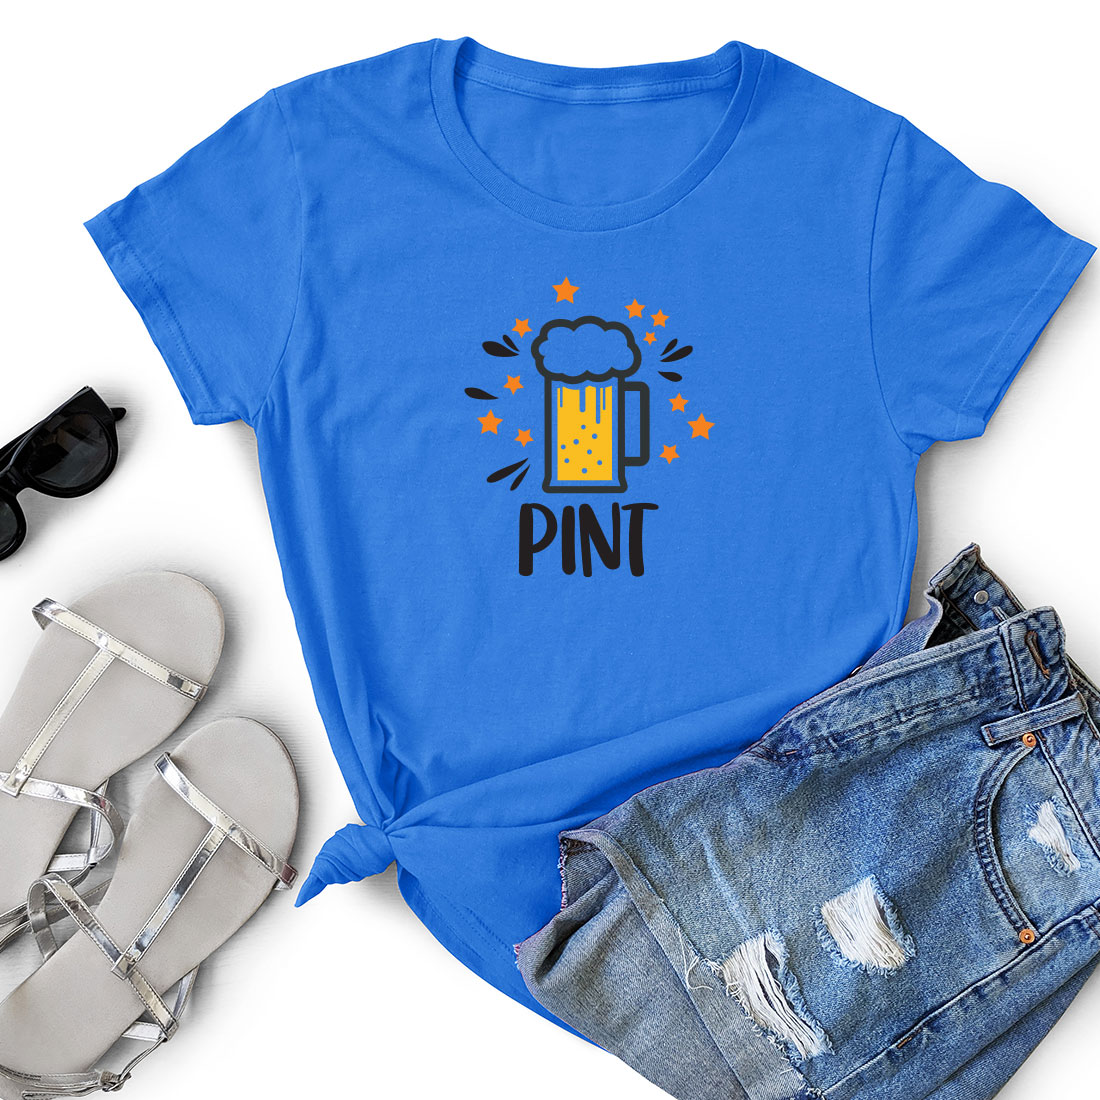 Blue shirt with a pint on it next to a pair of shorts.